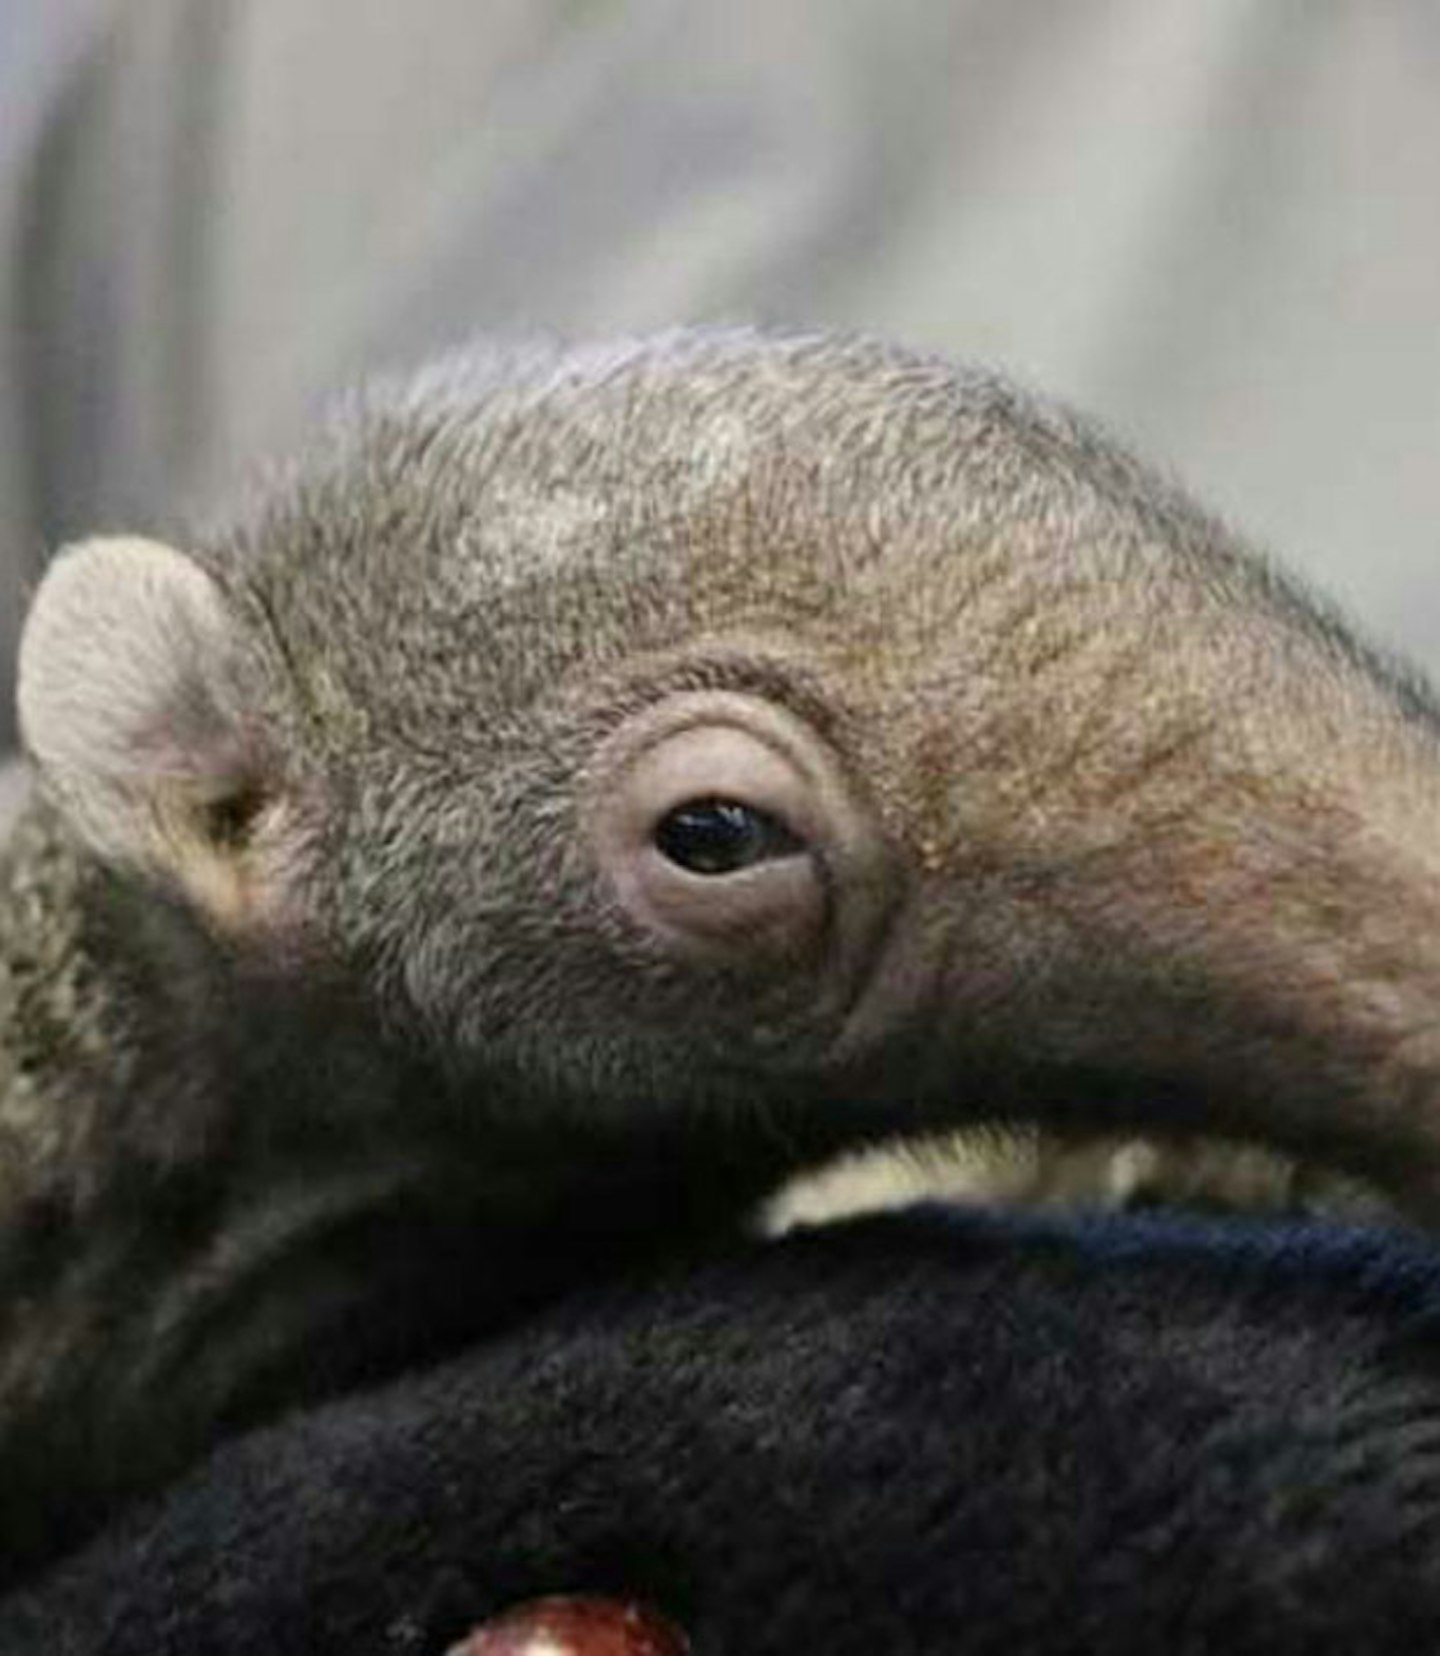 Baby anteater